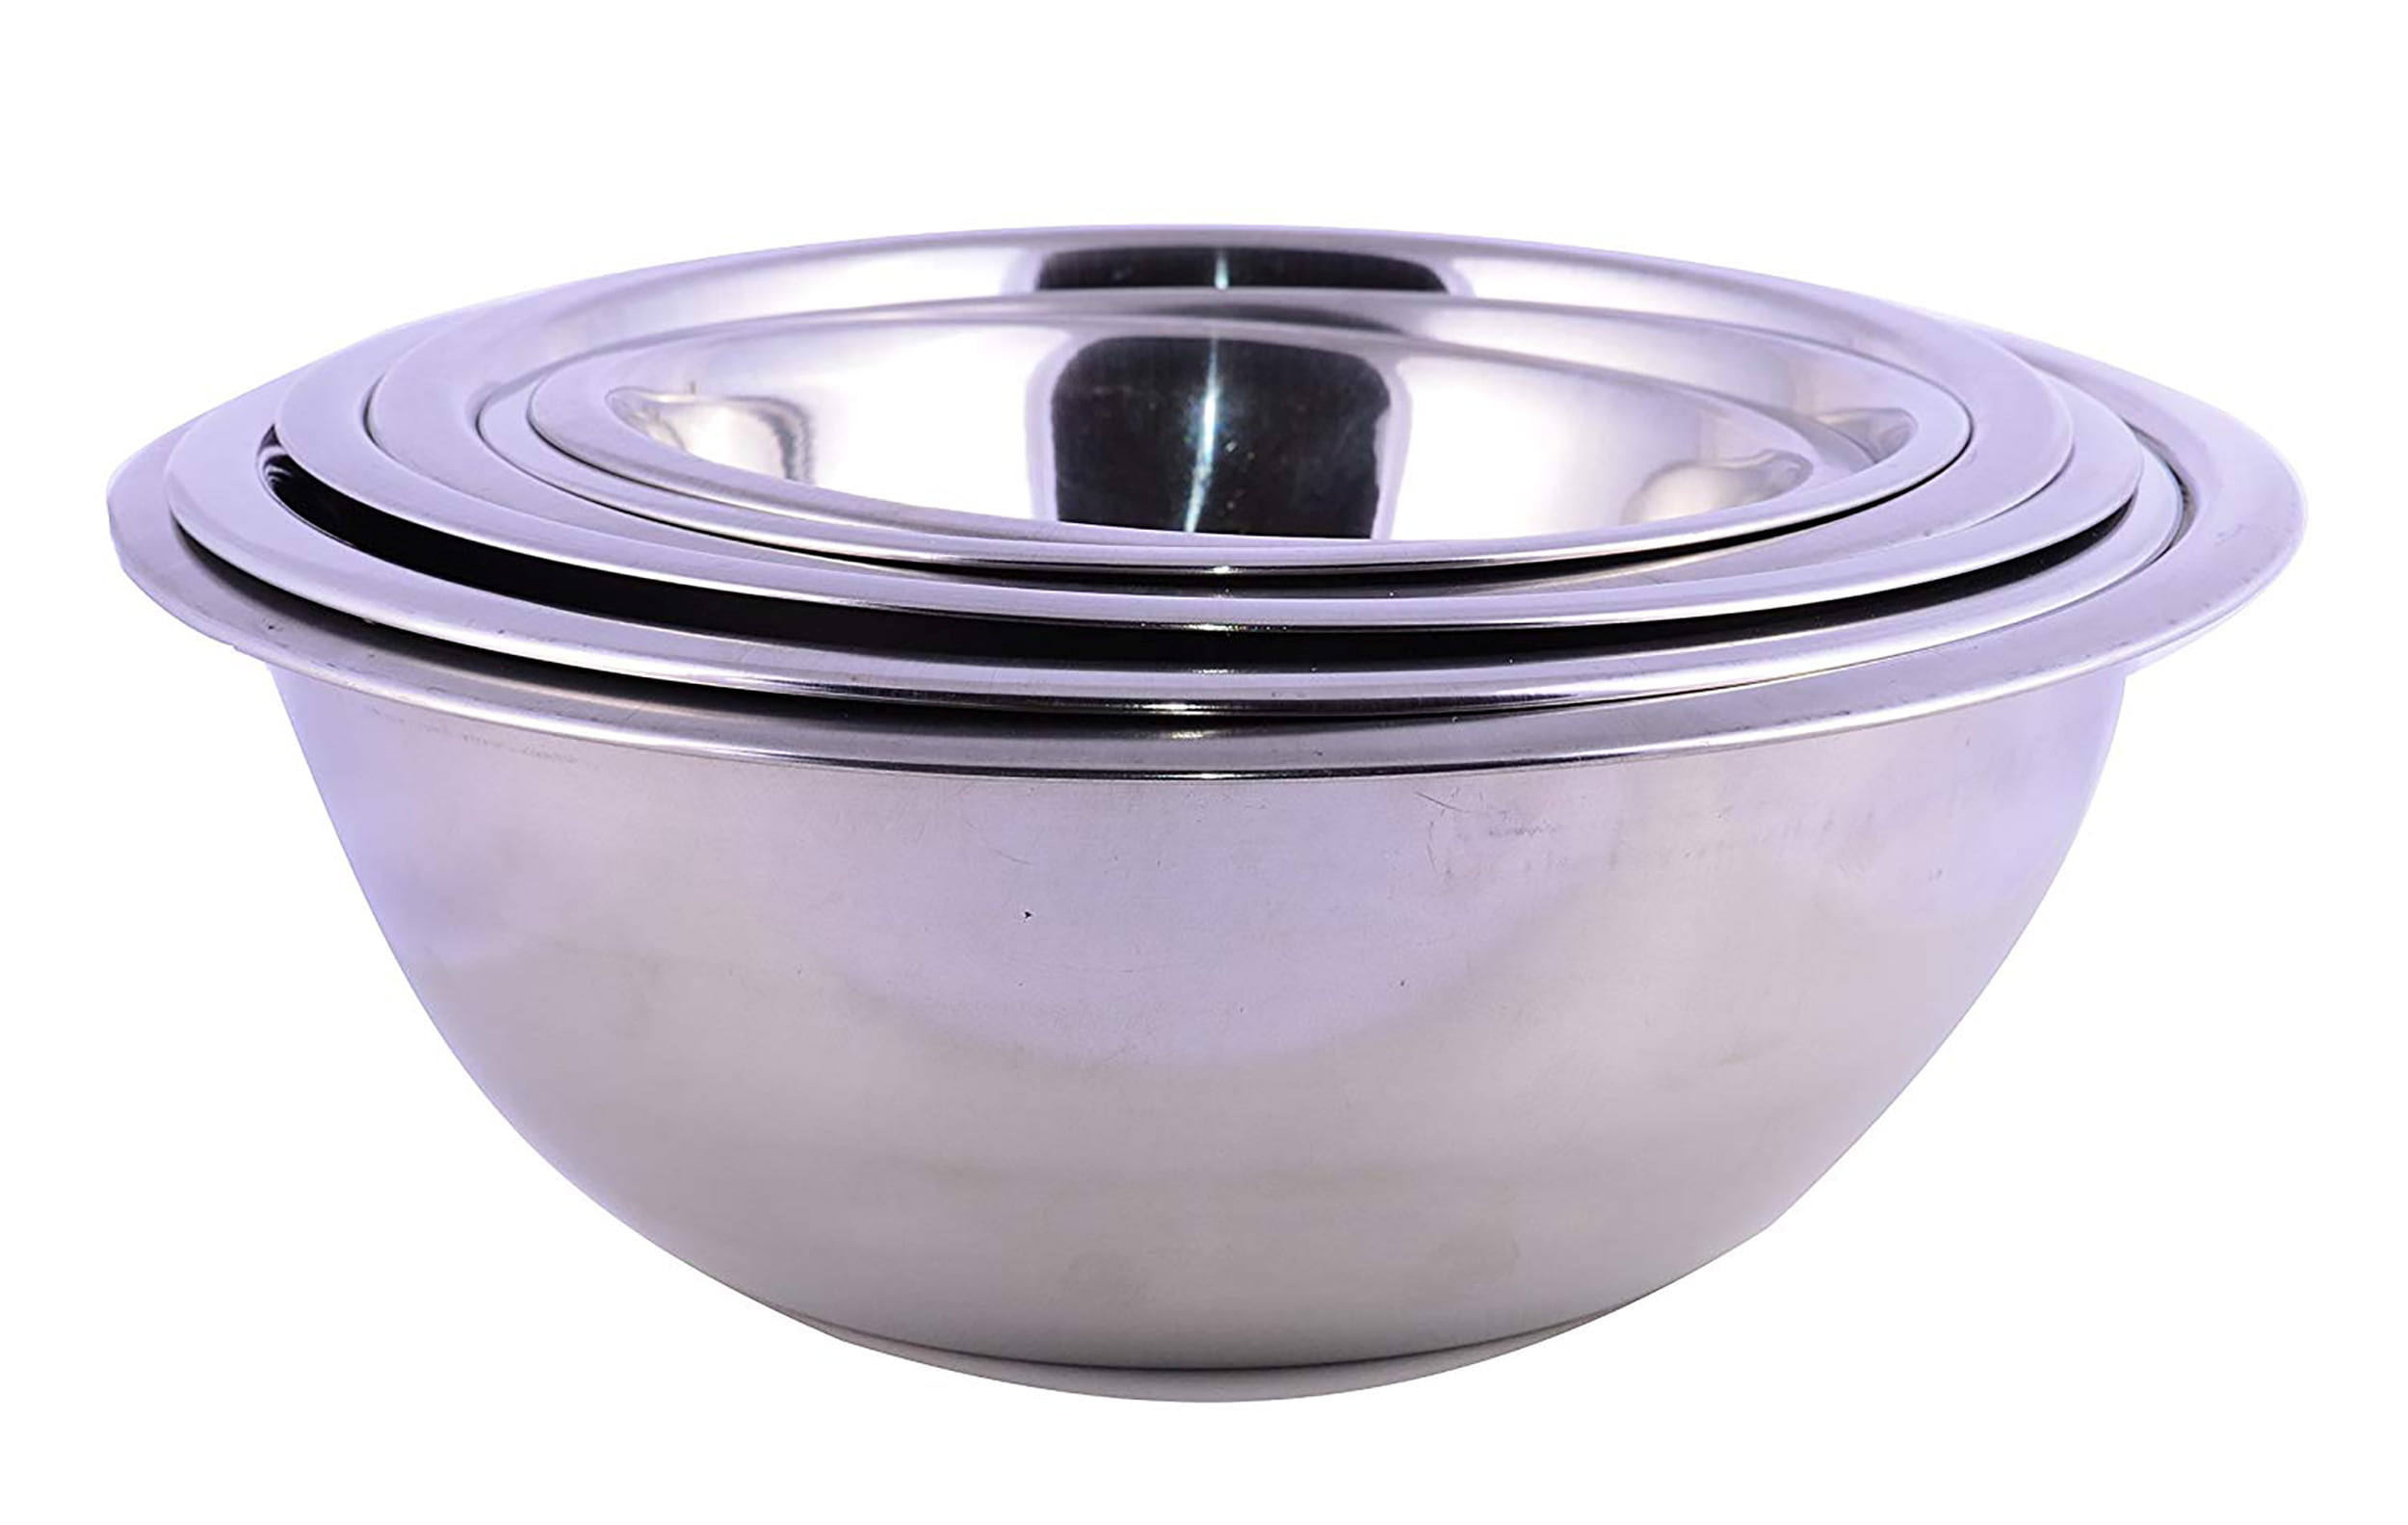 Cuissentials Stainless Steel Mixing Bowls with Plastic Lids - Set